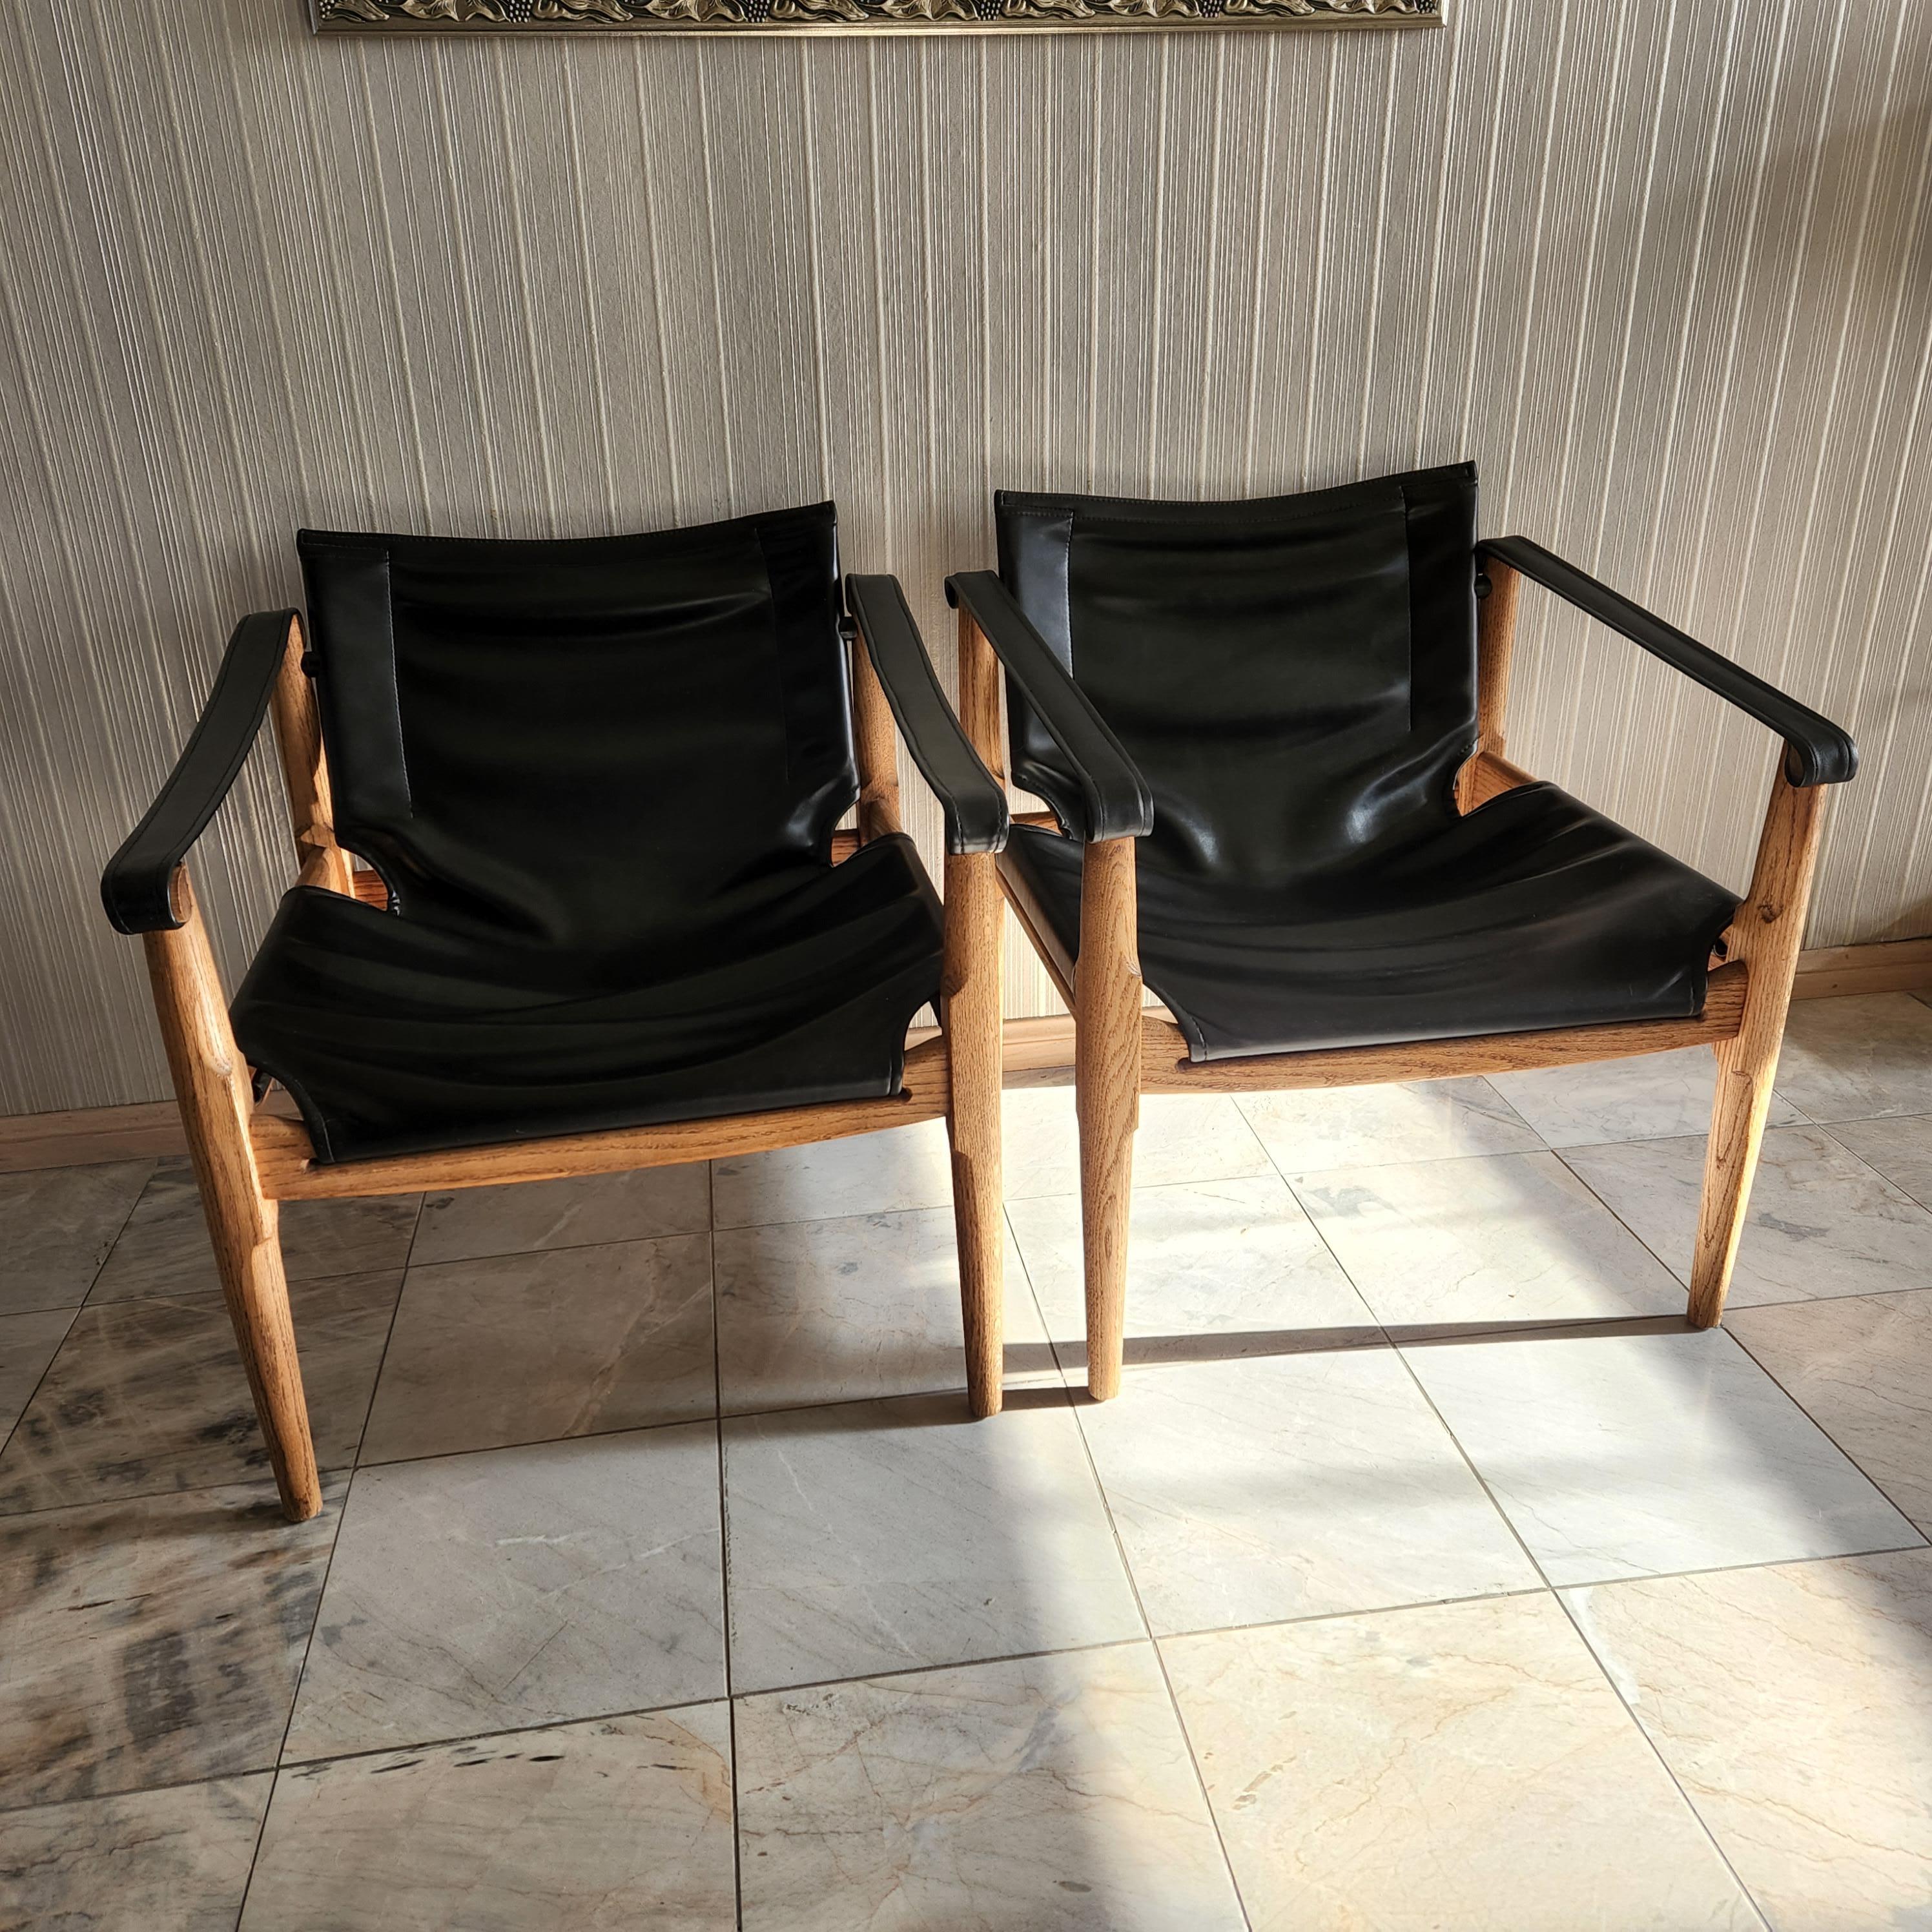 Safari chairs in black
Brown saltman sculptural safari sling chairs 1960s, designed by Douglas Heaslett.
Faux black leather looks like leather on solid oak wood frame.
Maker stamp present.
24W x 27H x 25D and 14 seat height inches.
Original